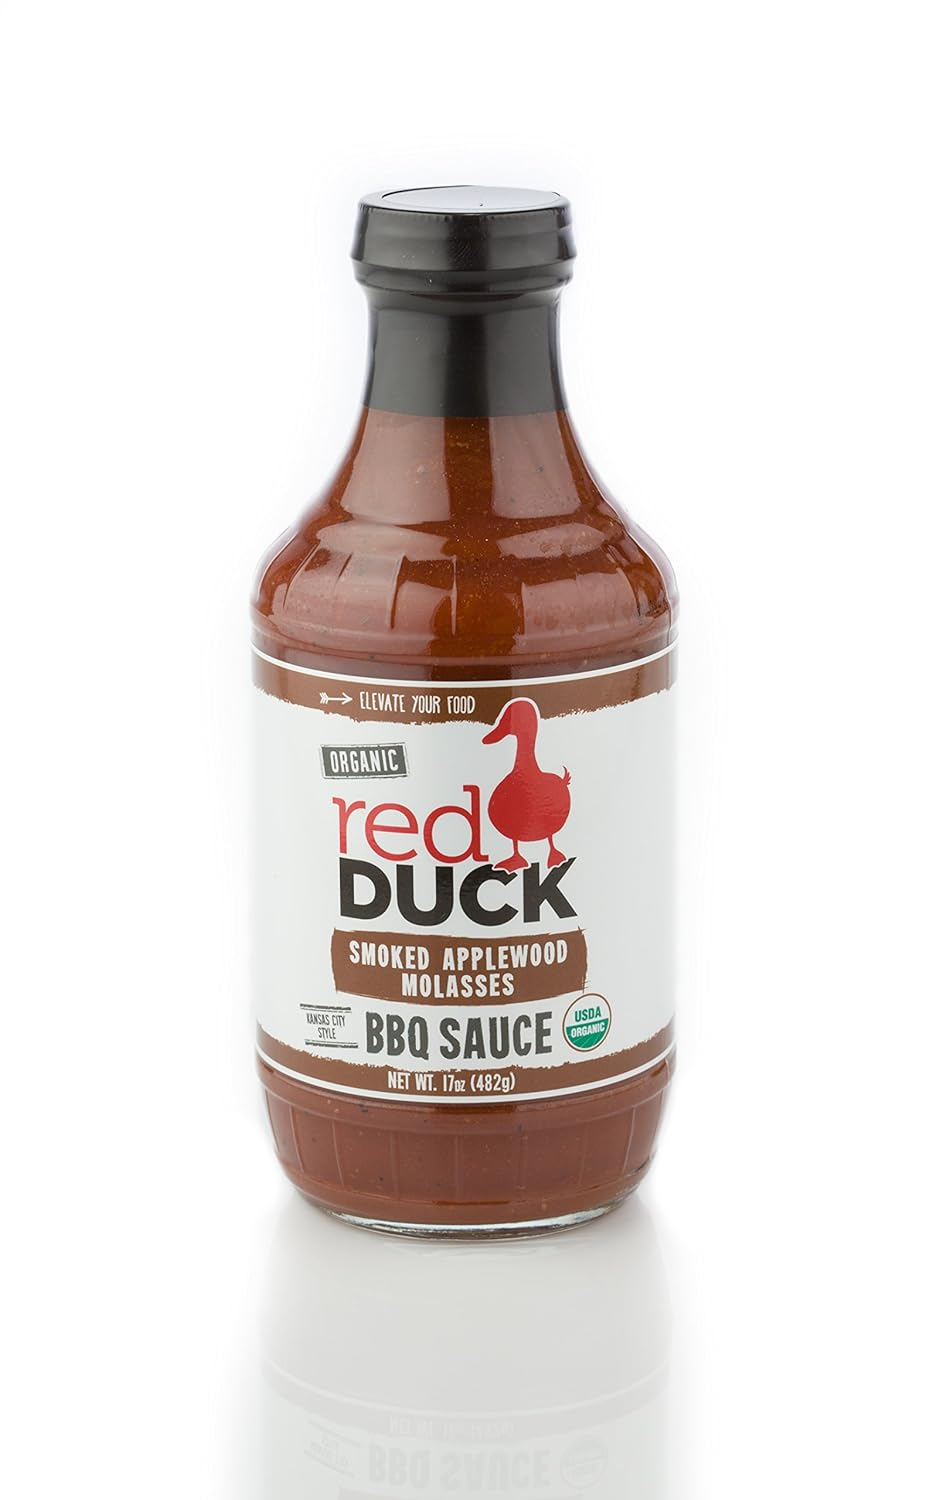 Red Duck Smoked Applewood Molasses Organic BBQ Sauce - Gluten-Free, All Natural (Smoked Applewood Molasses, 17 fl. oz.) - Barbecue Whizz...Watch My Smoke!